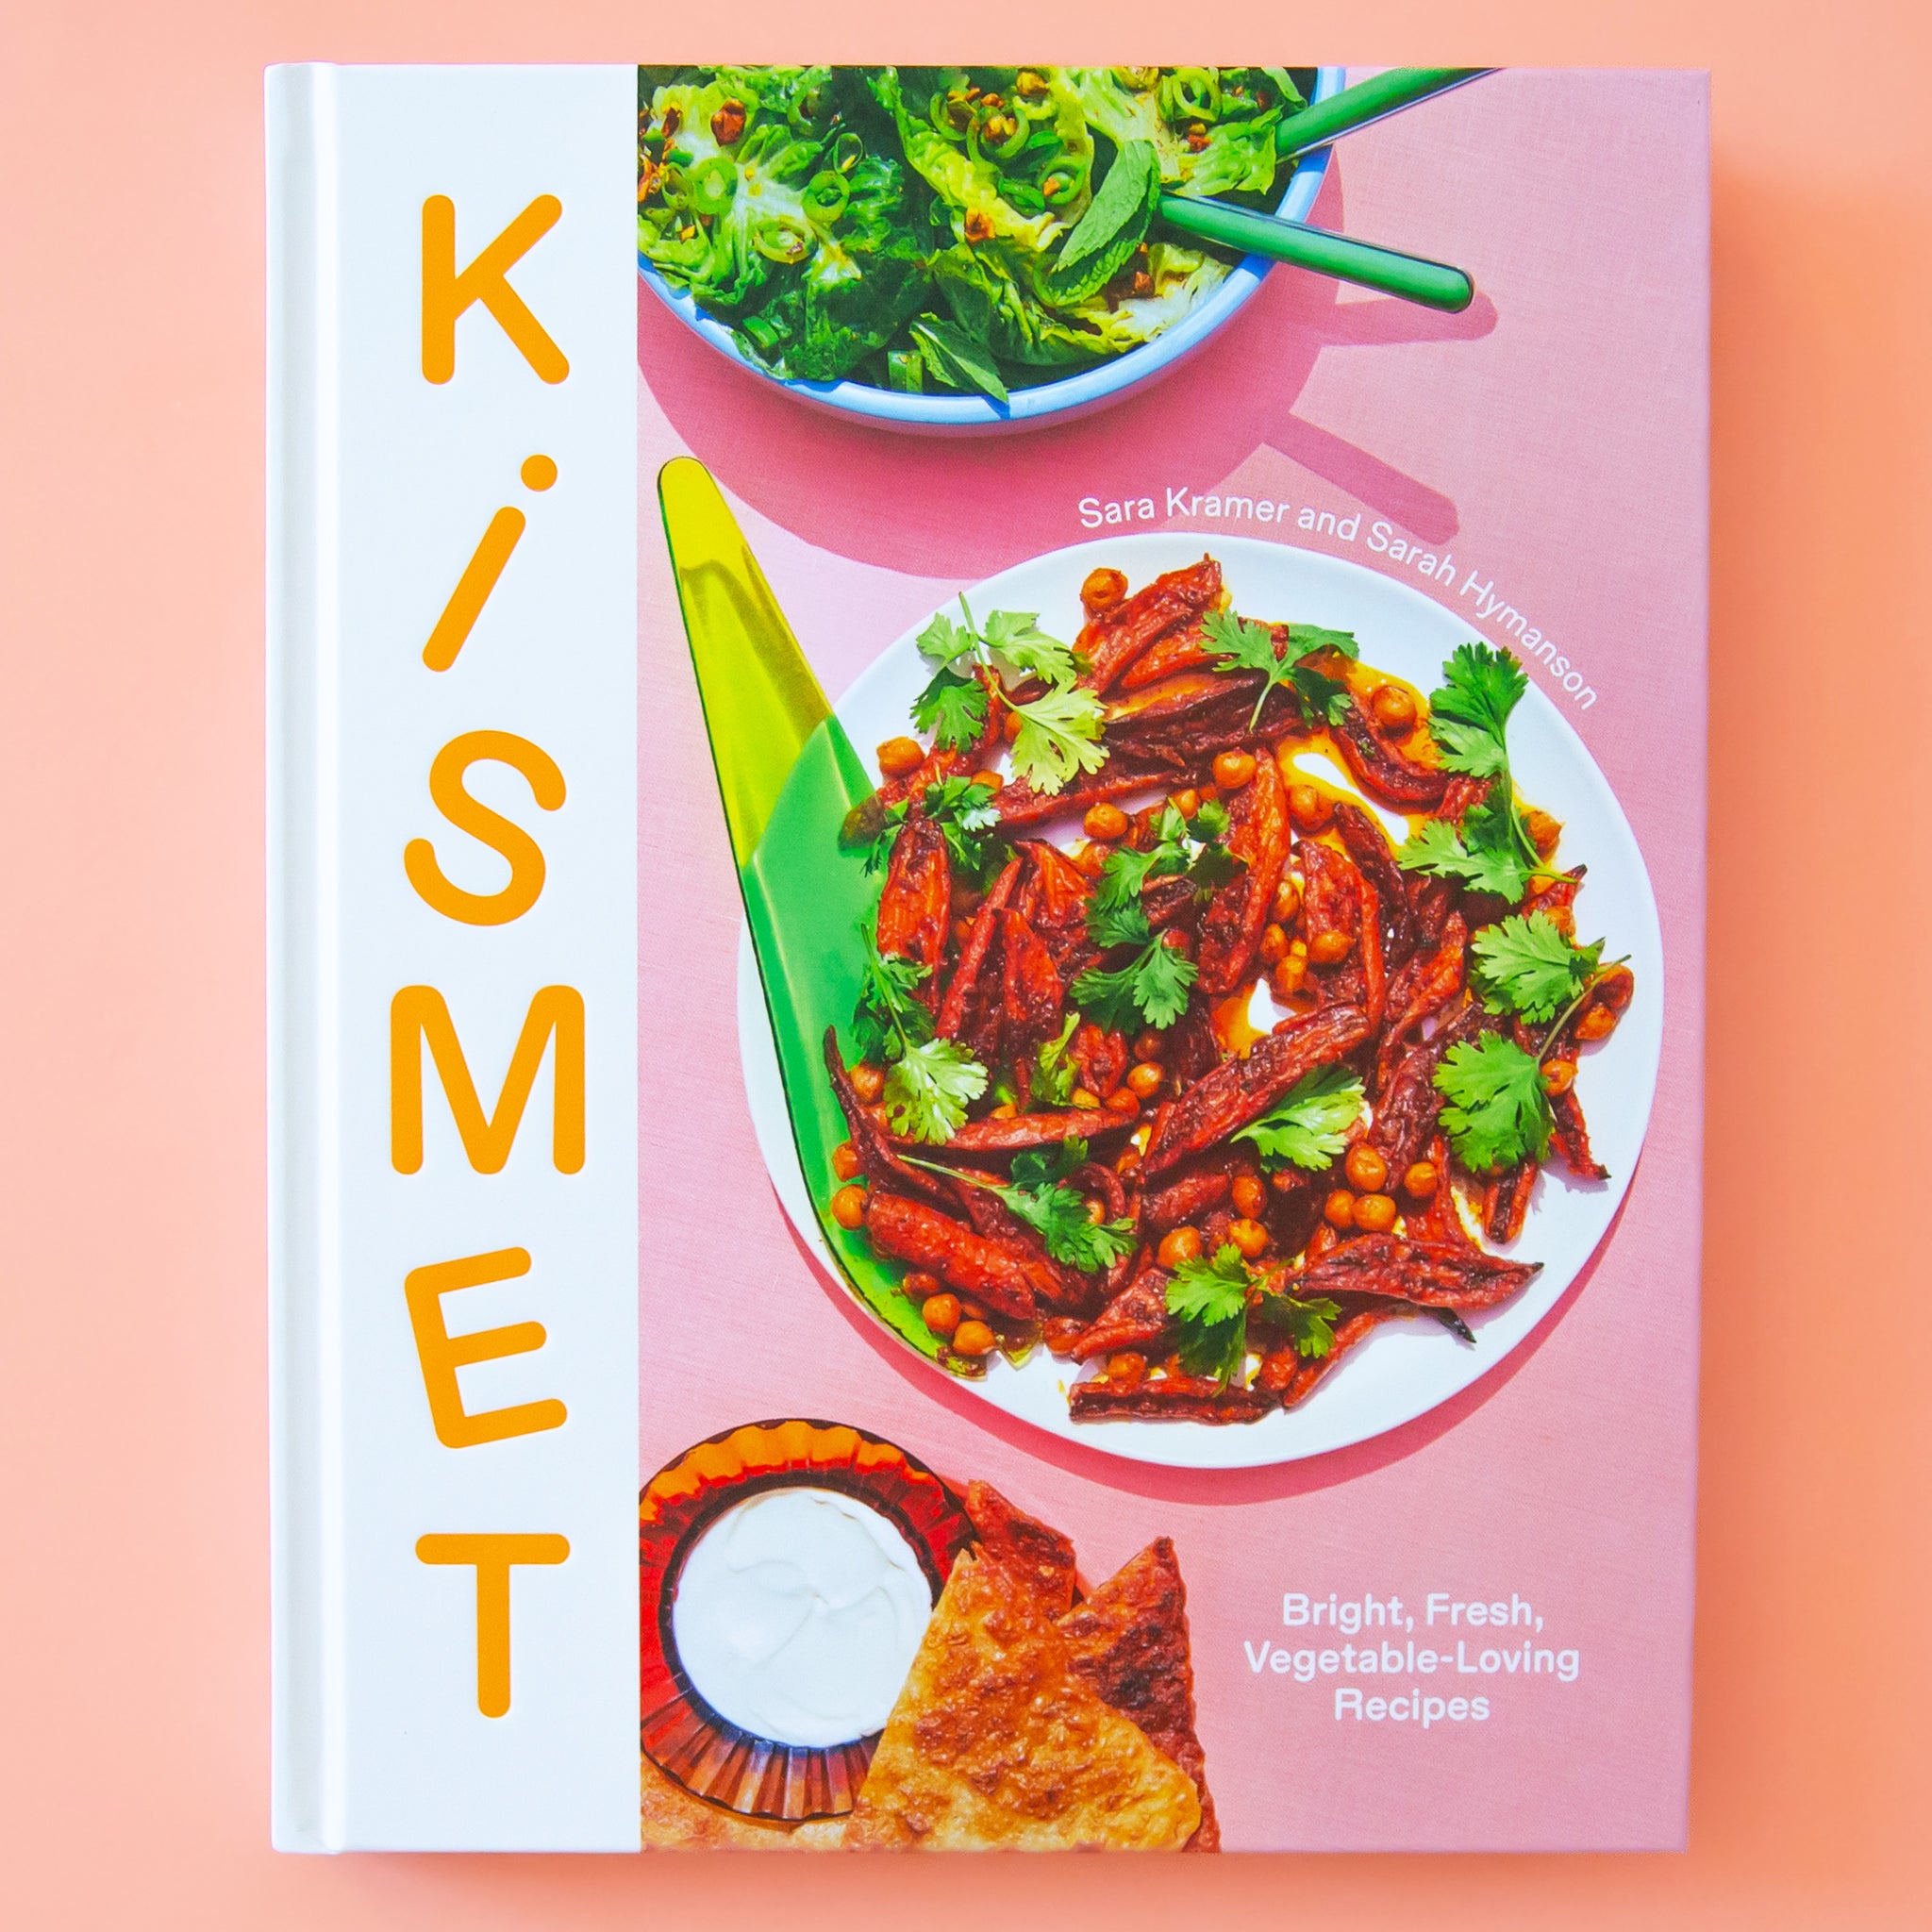 A pink book cover with photographs of three plates of food and the title along the left side that reads, "Kismet". 